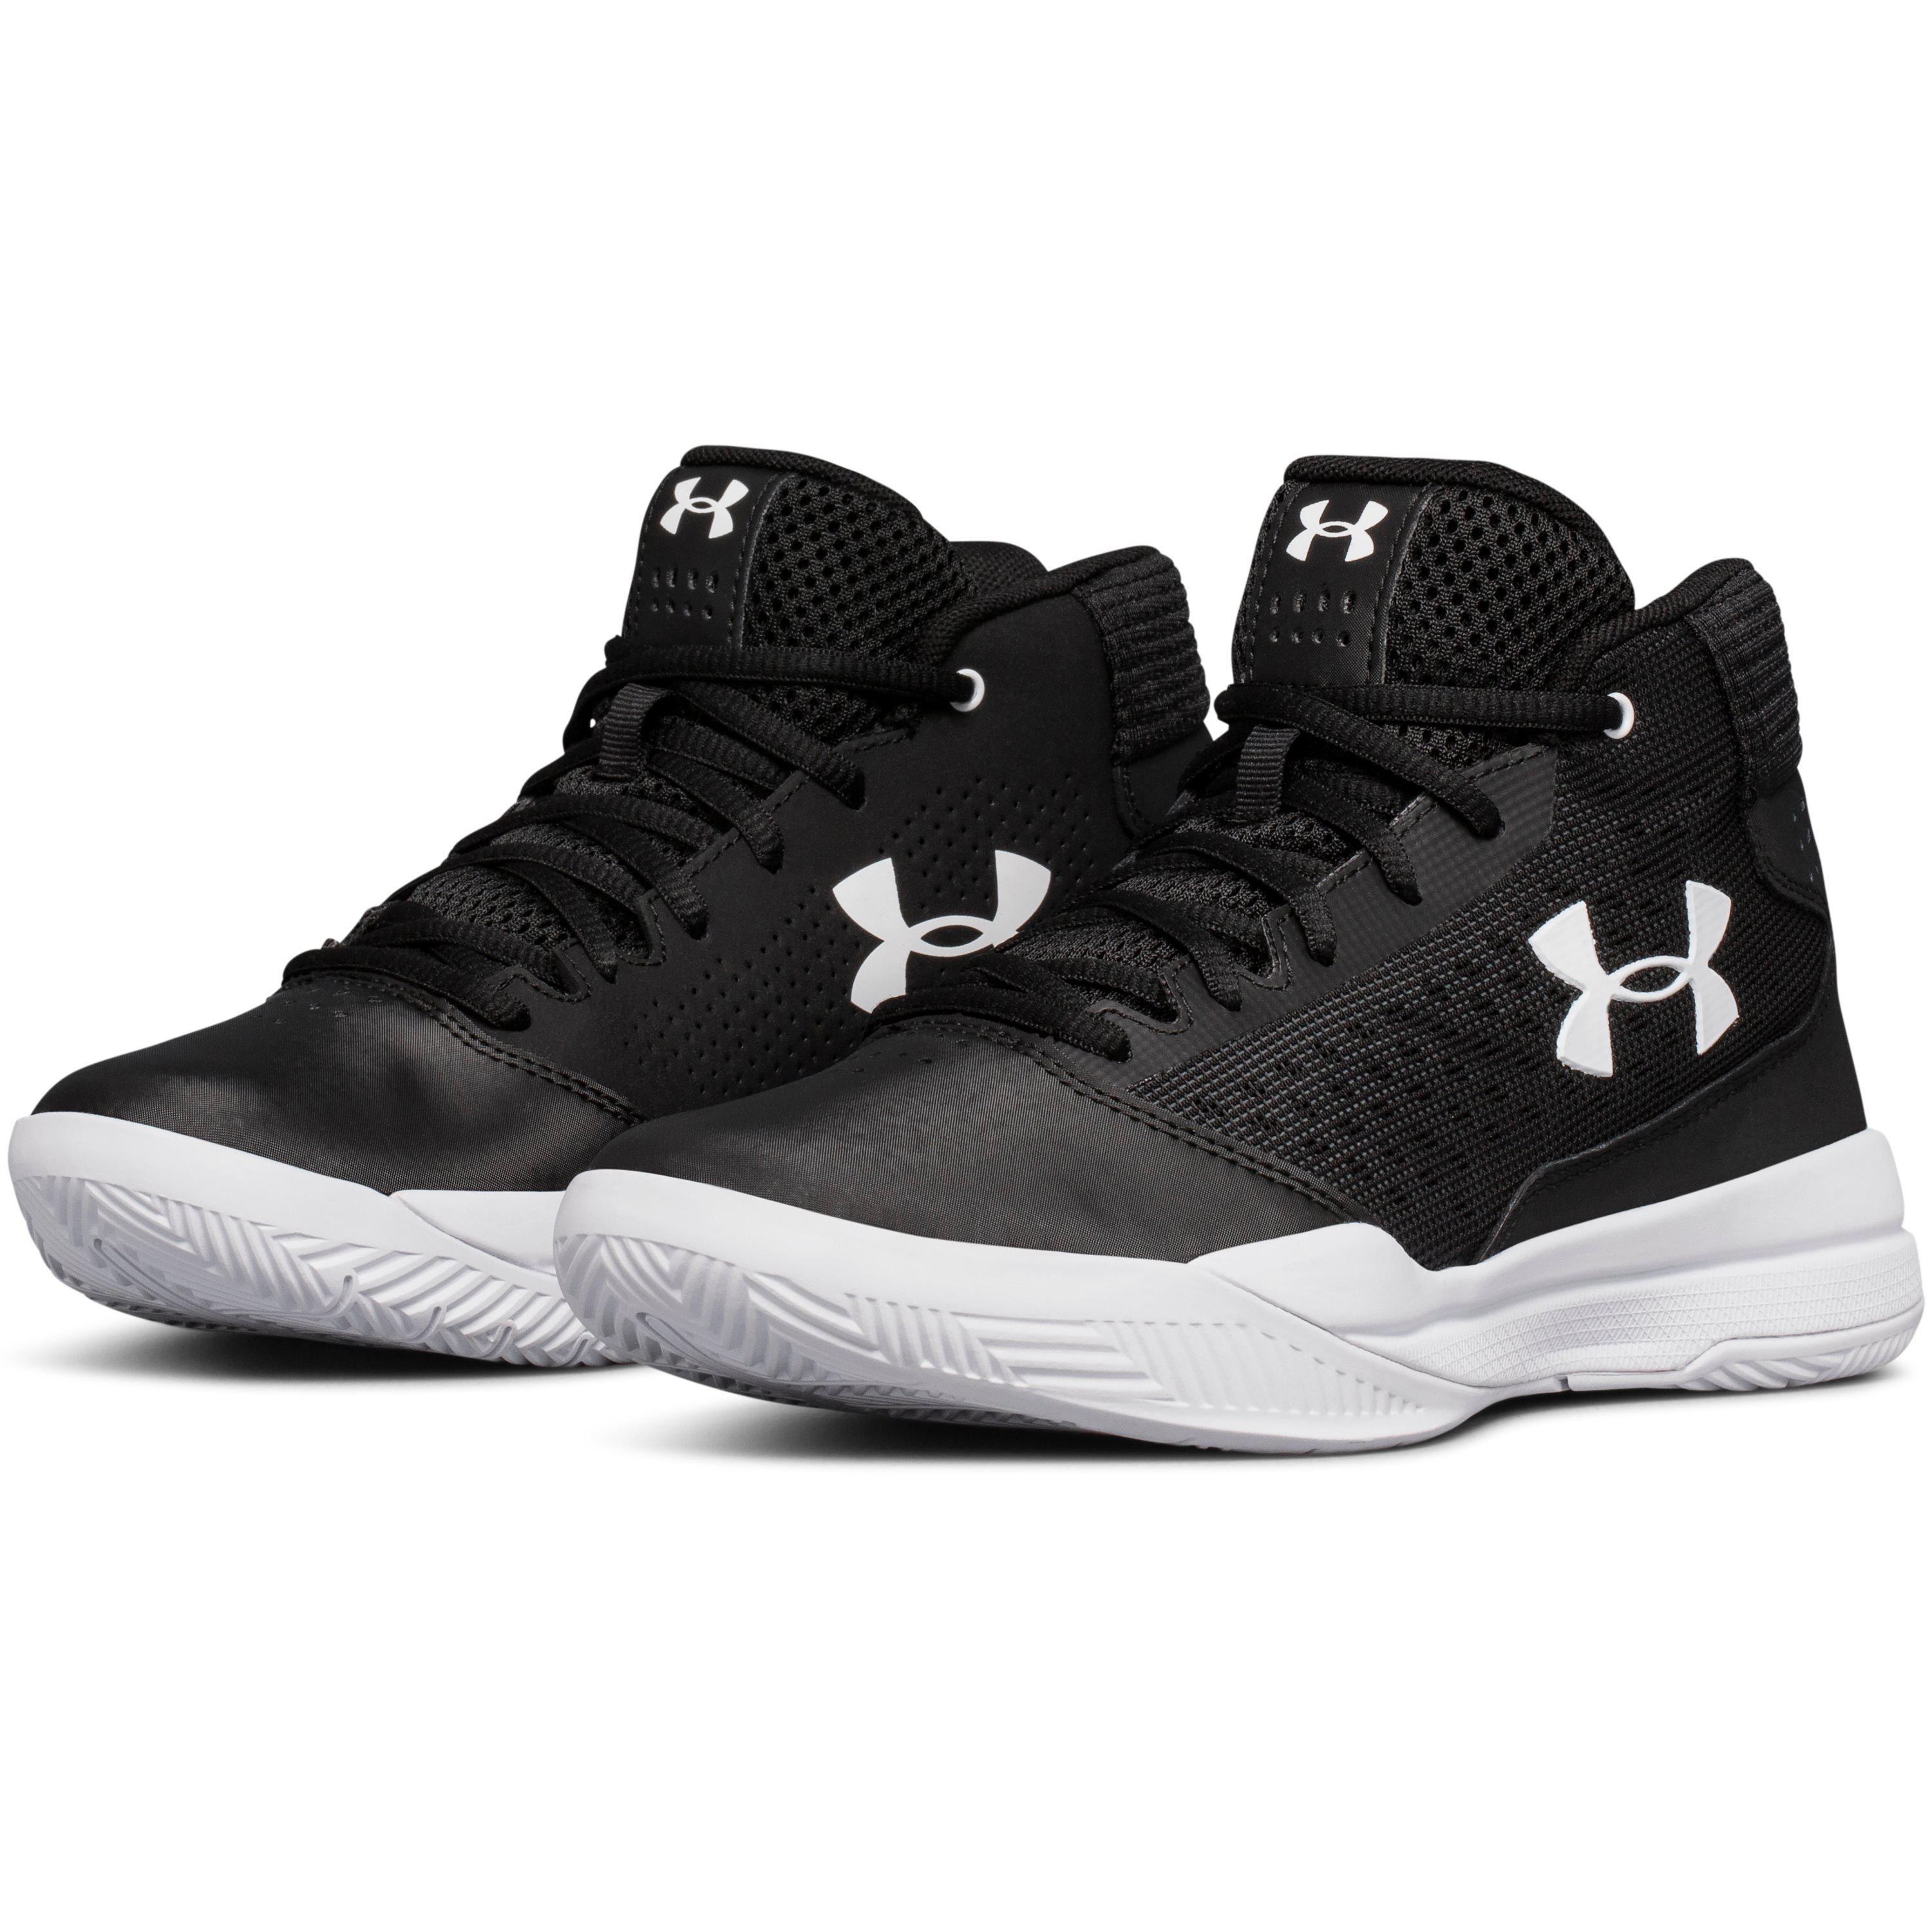 Under Armour Leather Women's Ua Jet 2017 Basketball Shoes in Black /White  (Black) - Lyst